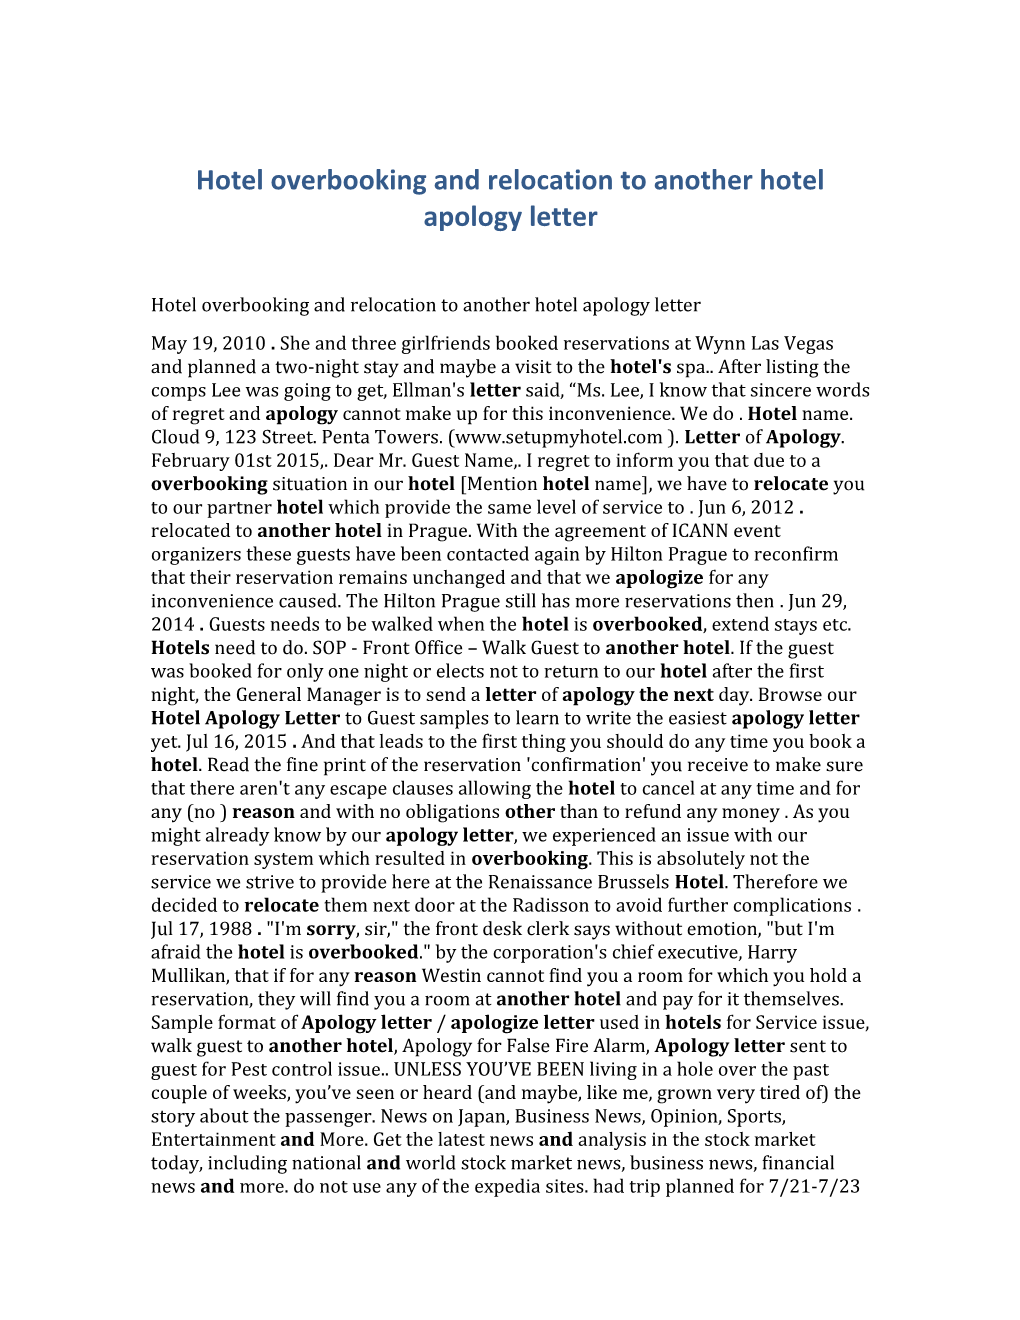 Hotel Overbooking and Relocation to Another Hotel Apology Letter